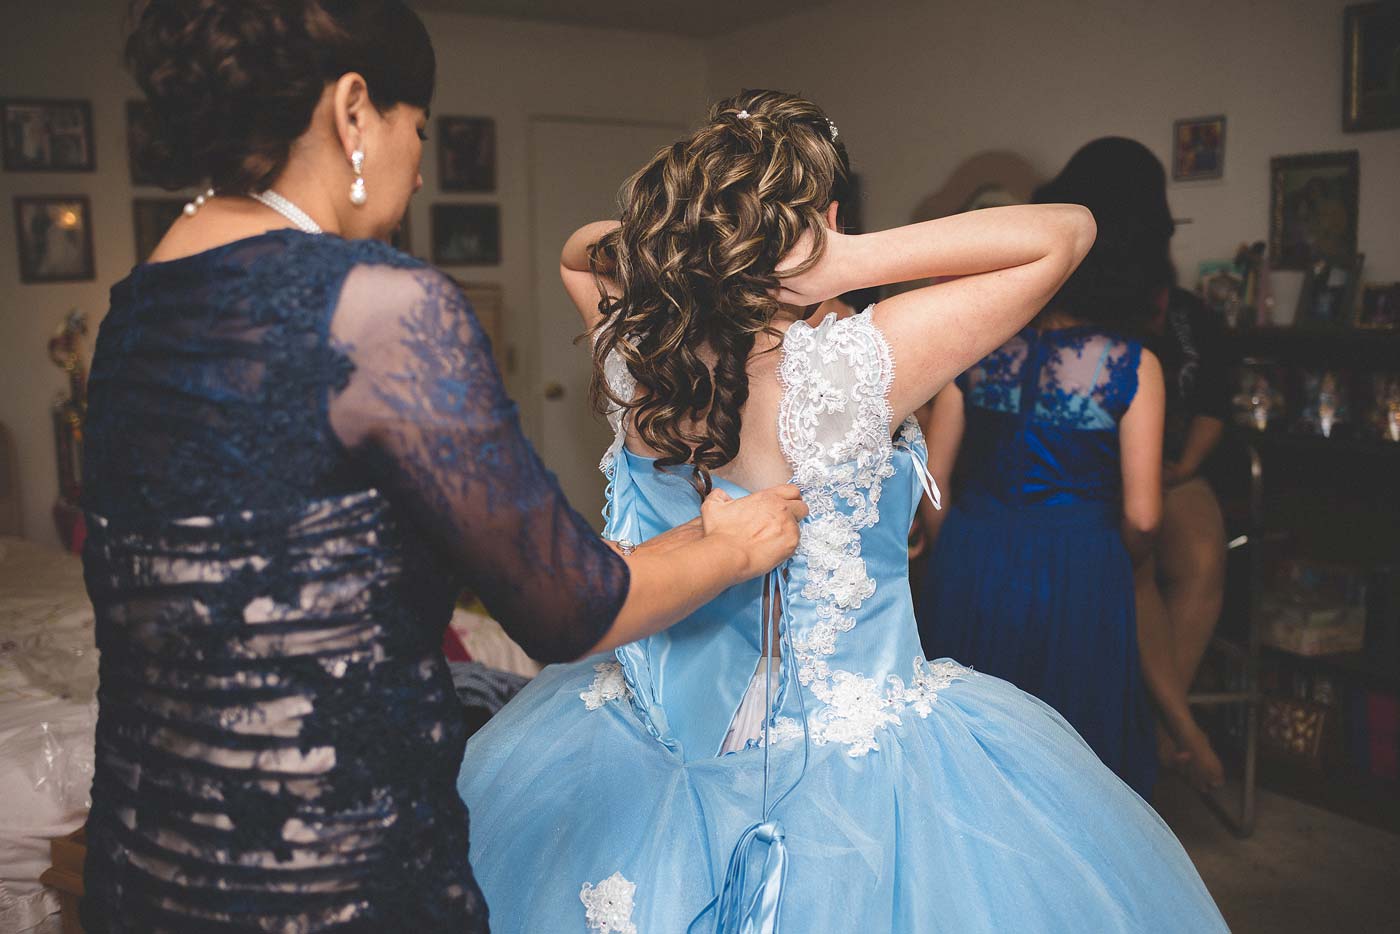 s02-Getting-Ready---Corinne's-Quince!-12.jpg